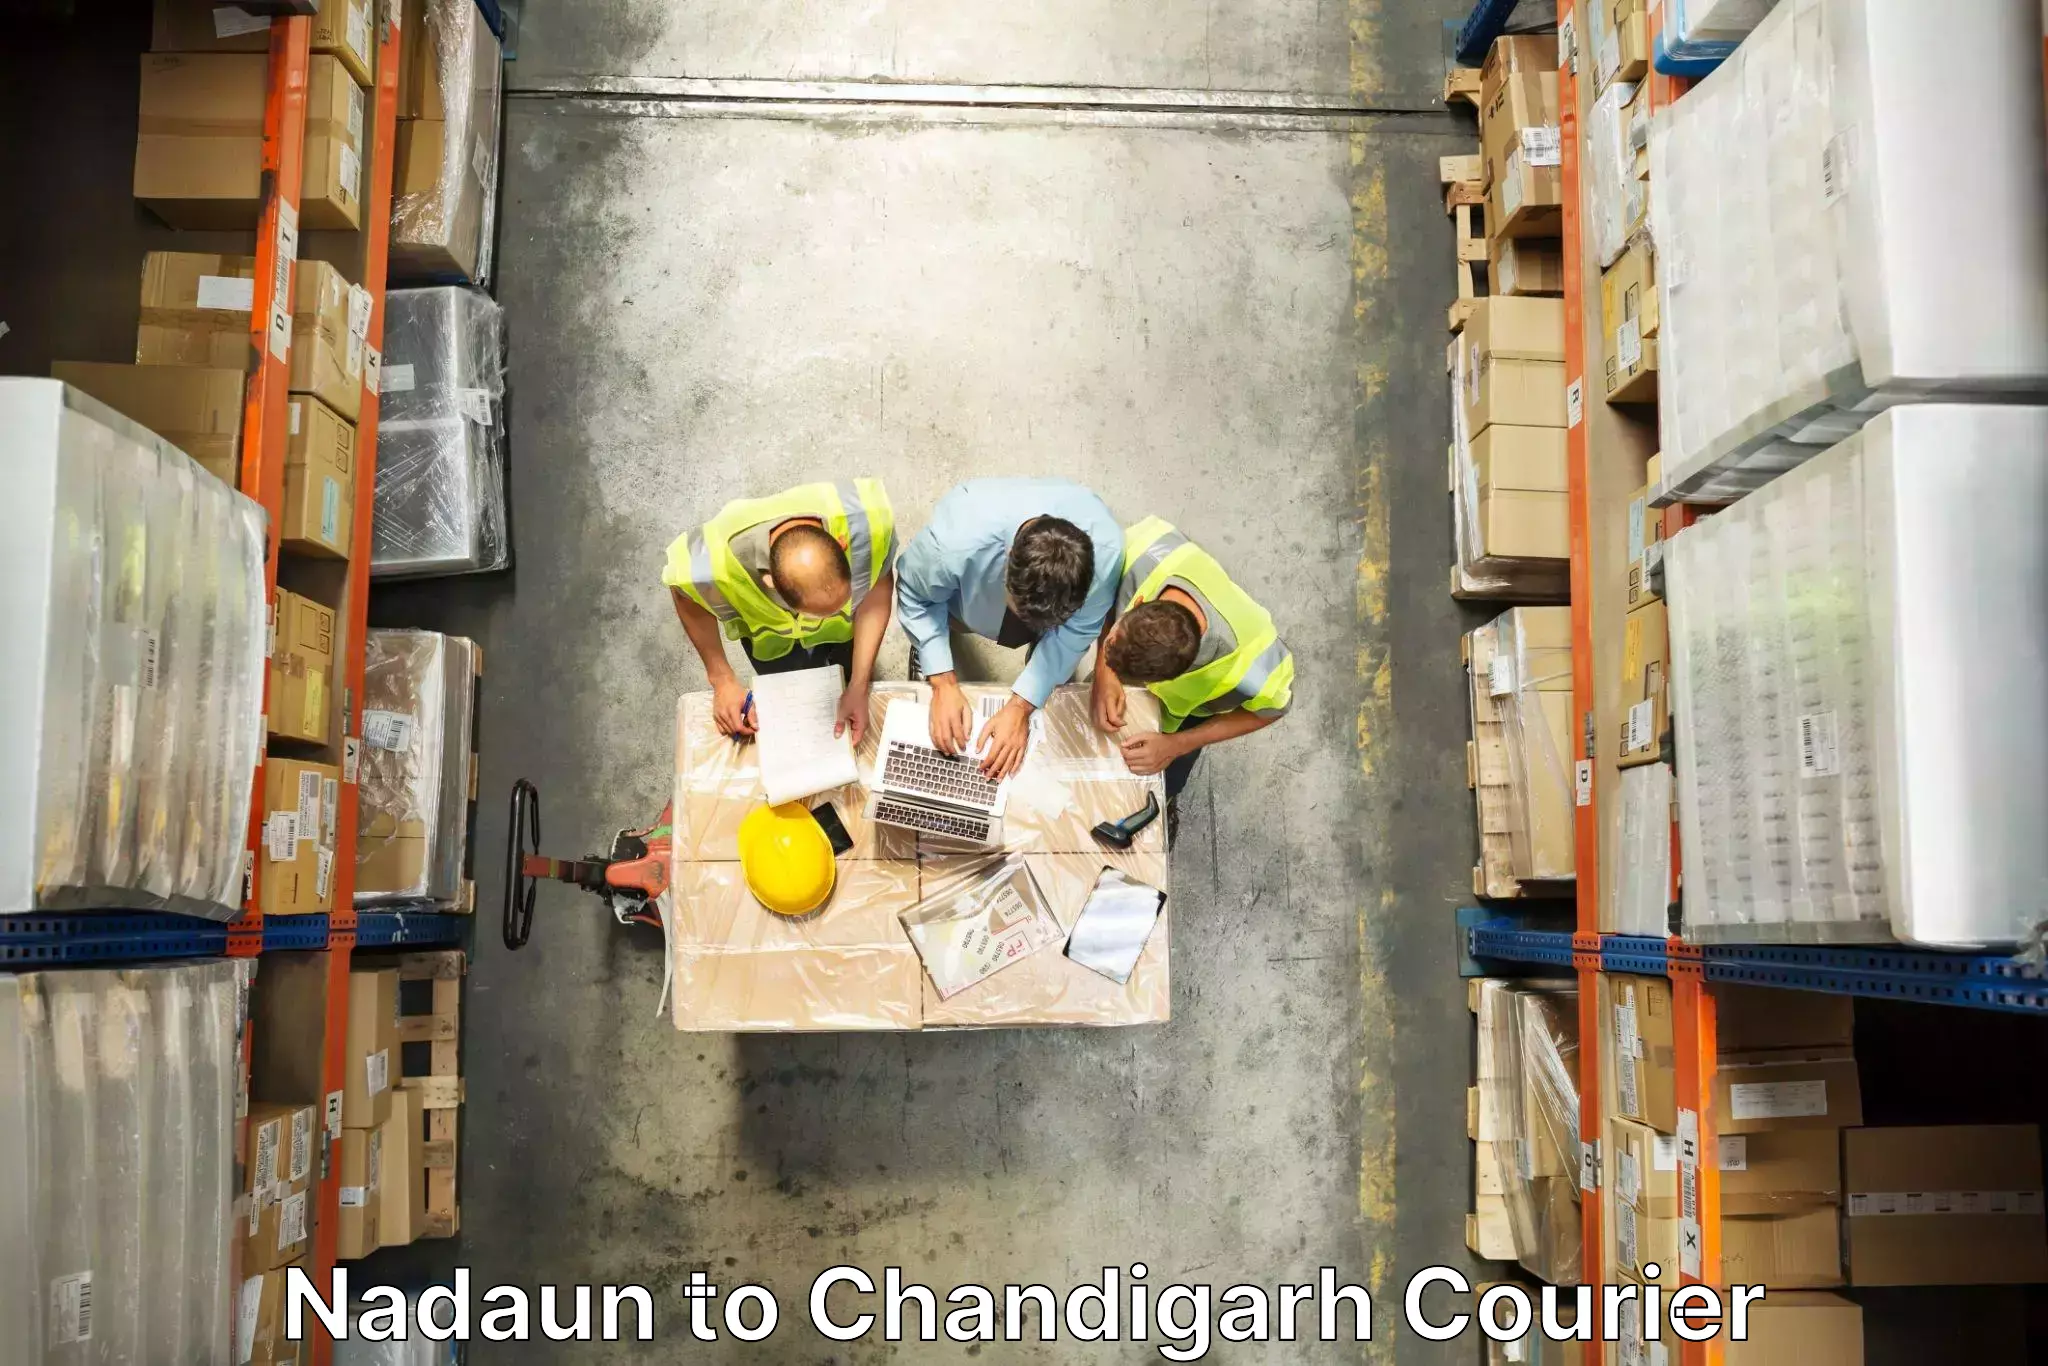 Furniture delivery service Nadaun to Chandigarh